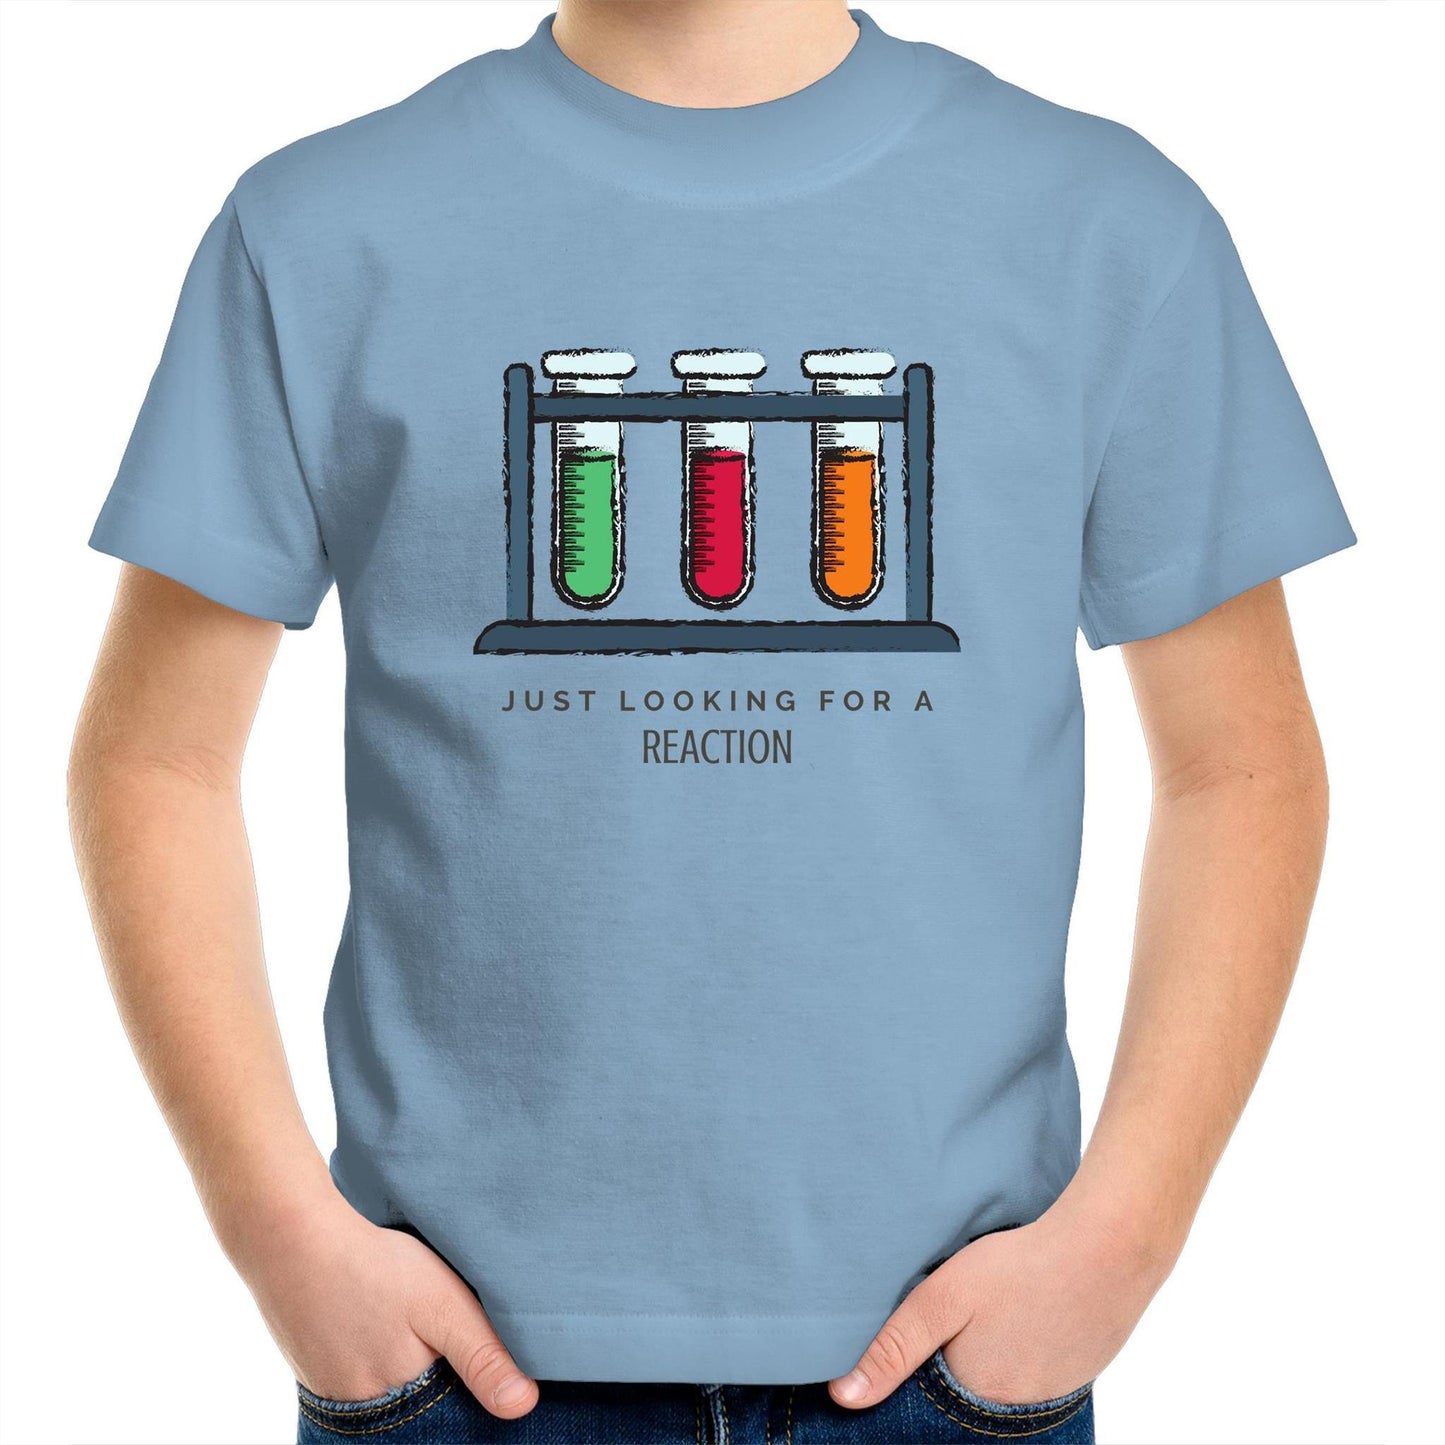 Test Tube, Just Looking For A Reaction - Kids Youth Crew T-Shirt Carolina Blue Kids Youth T-shirt Science